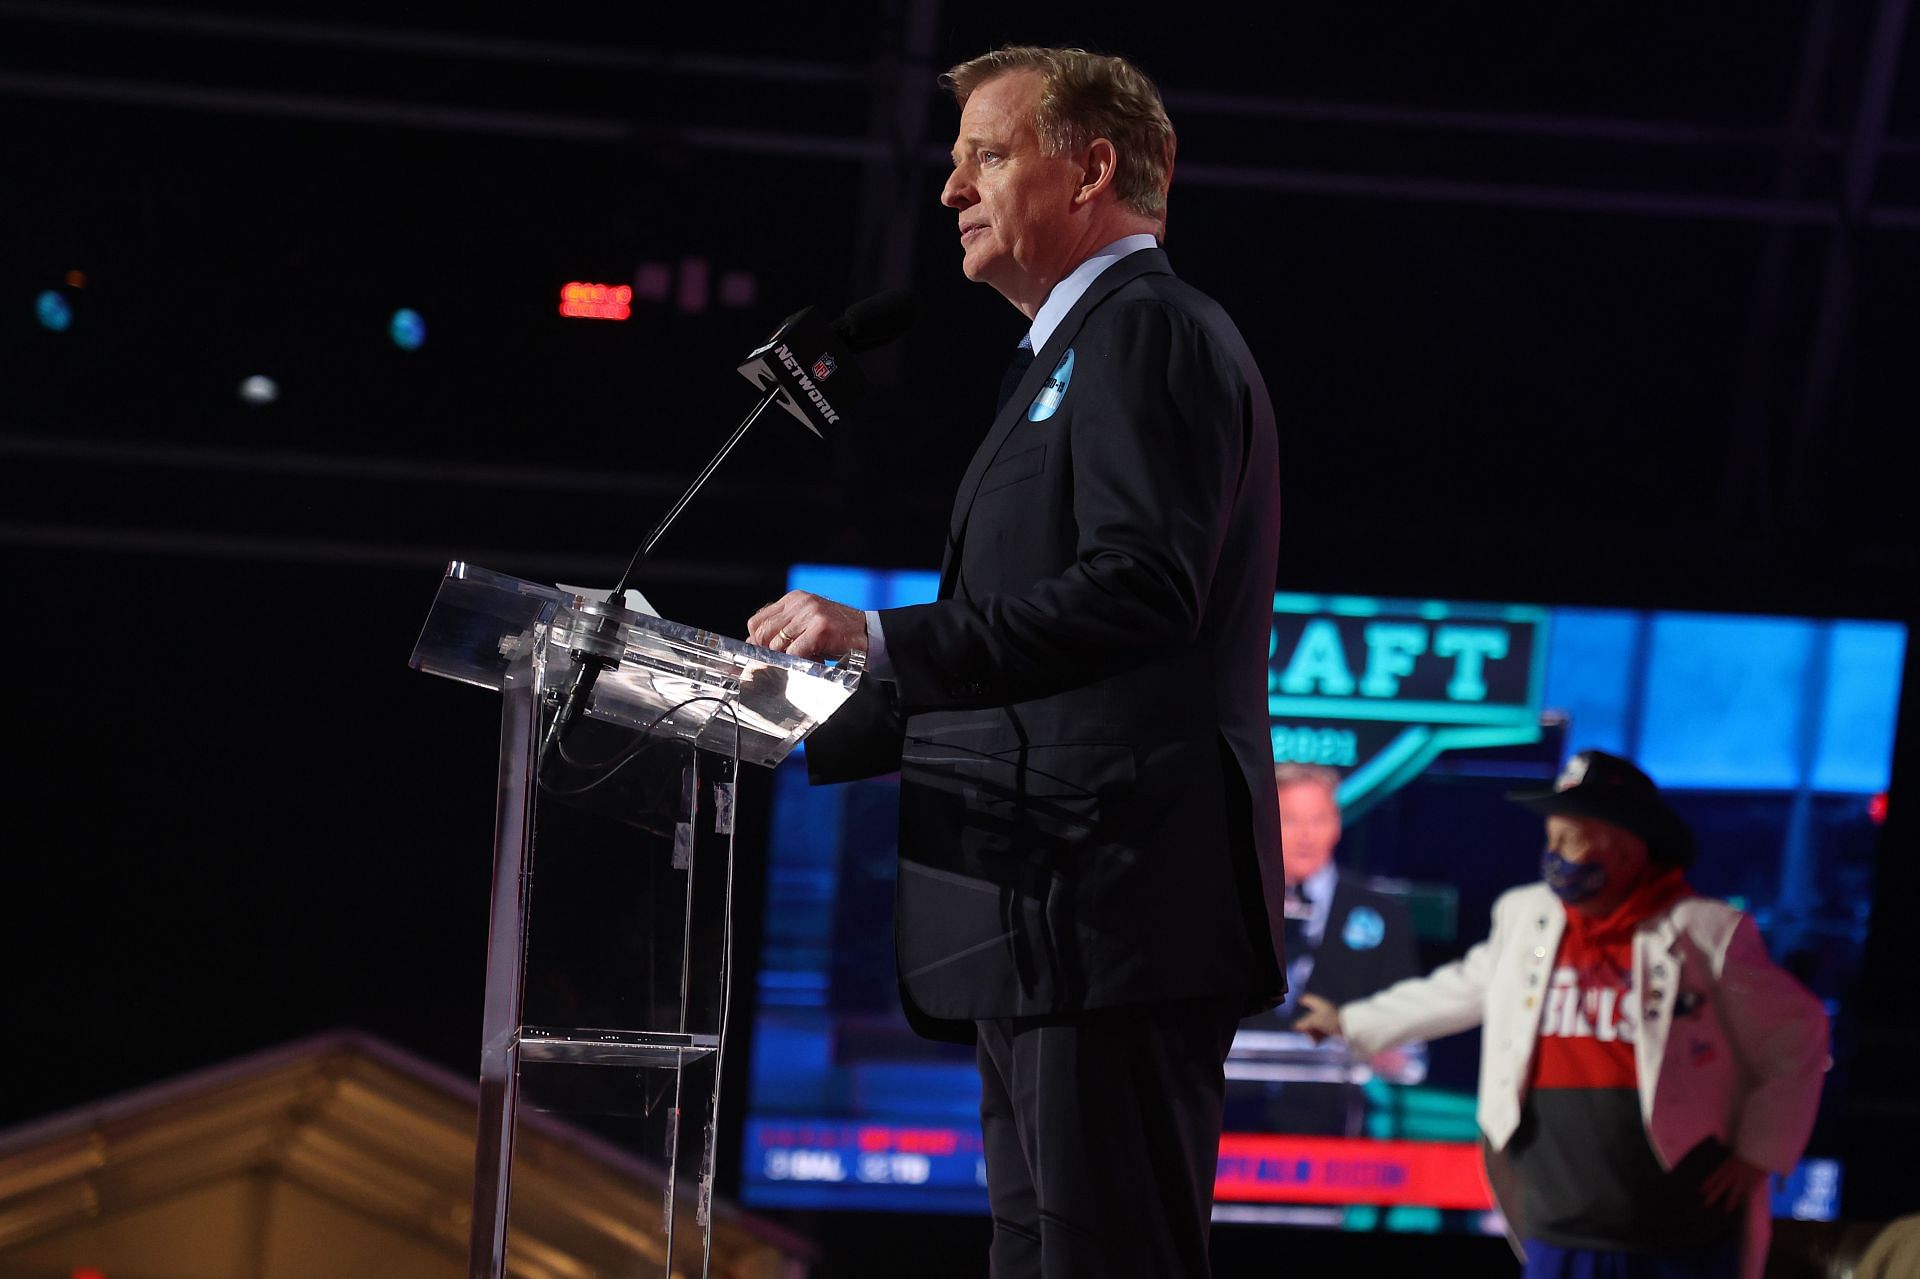 The current 2022 NFL Draft order prior to Week 13 is quite intriguing